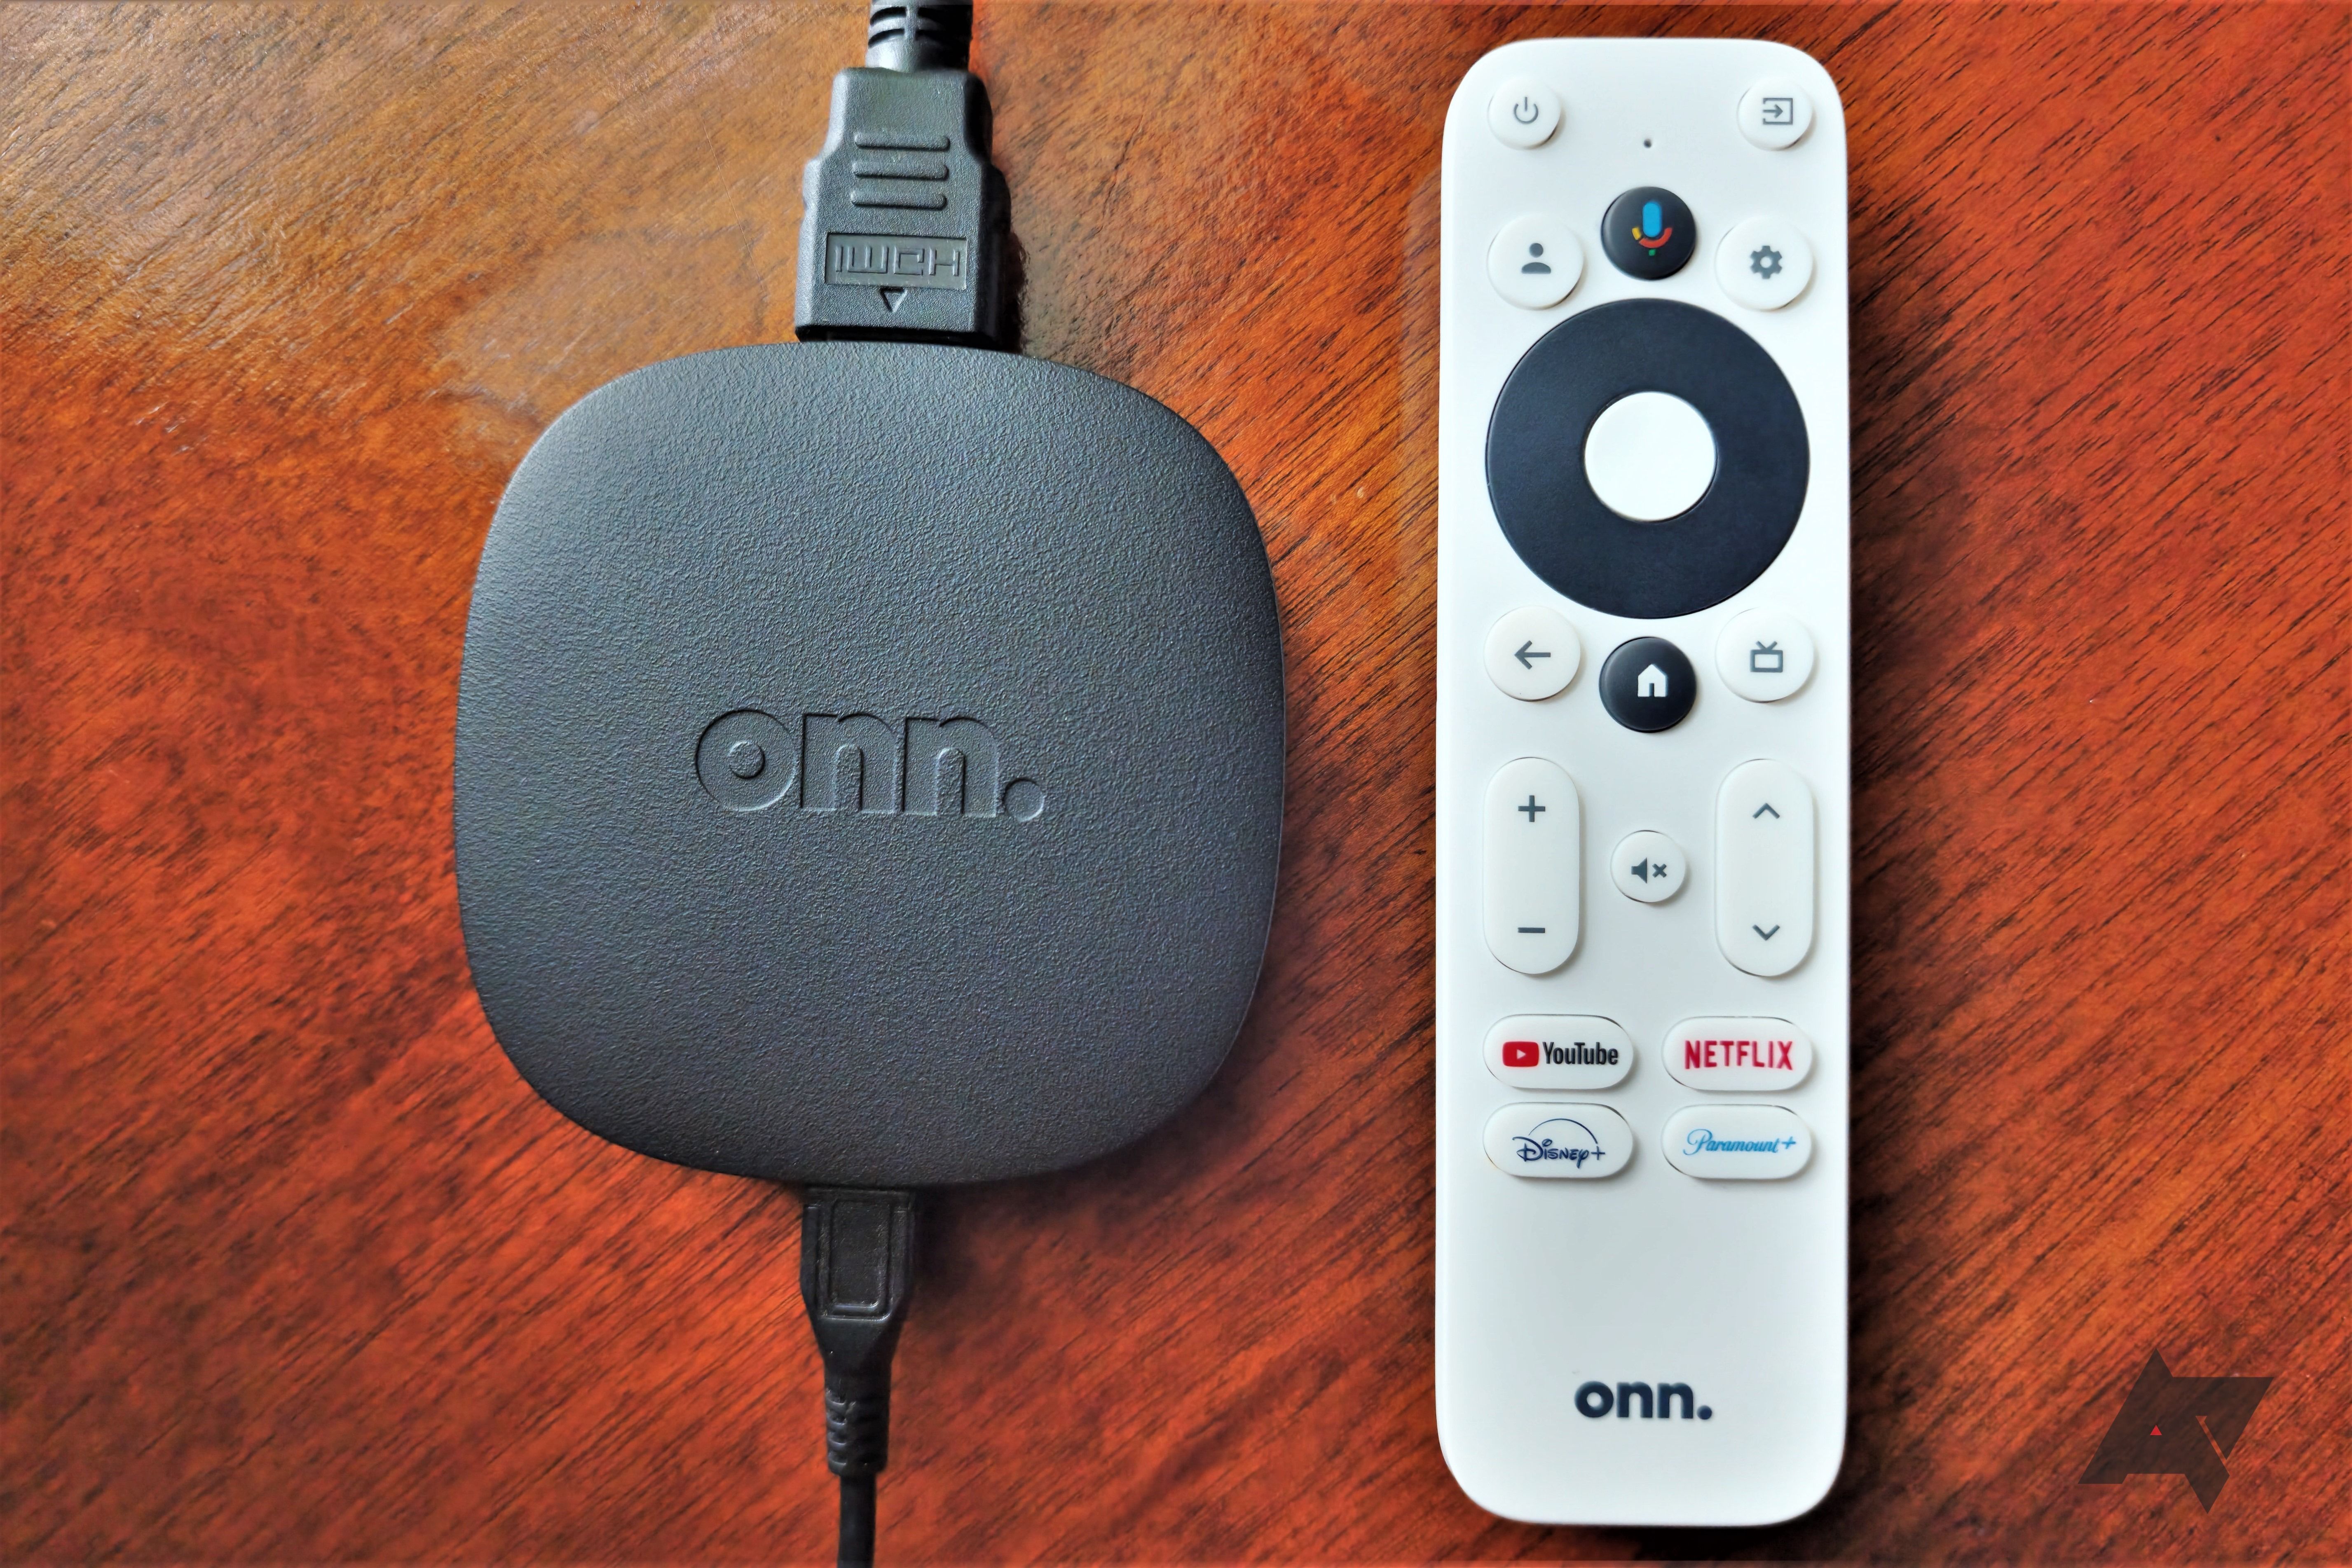 Onn Google TV 4K Streaming Box laying face up in wood table